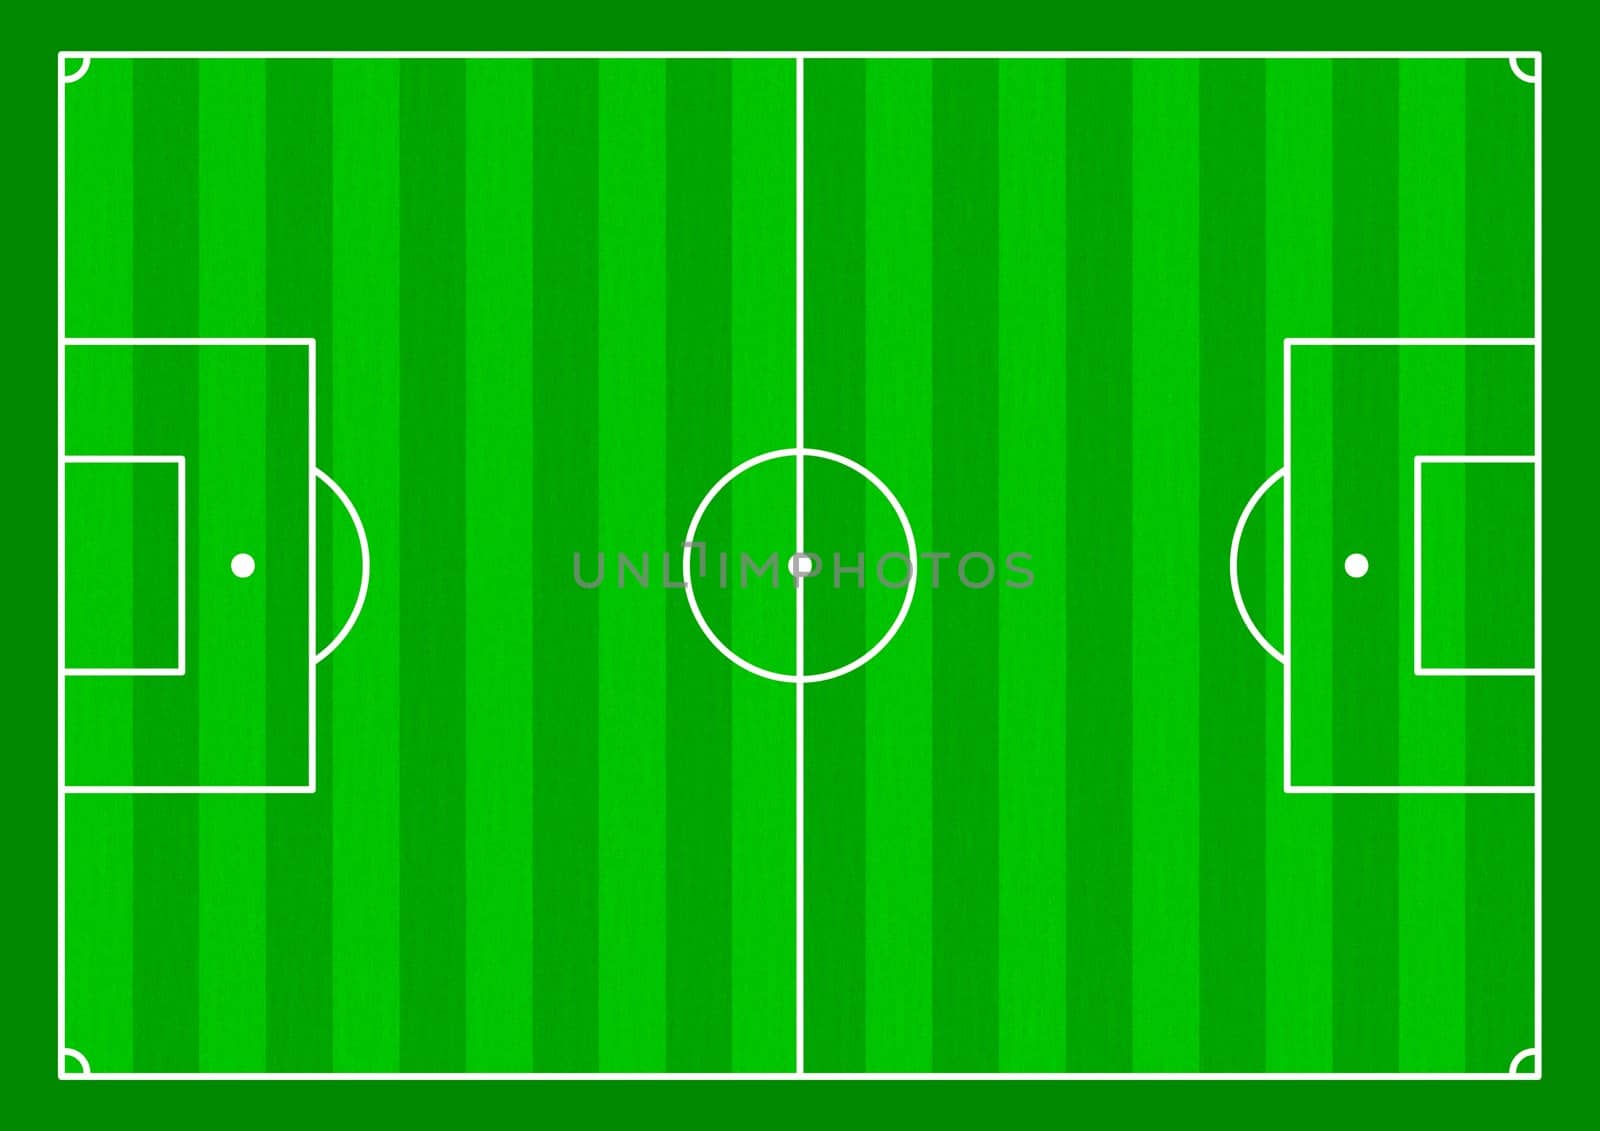 Illustration of a Soccer field from above